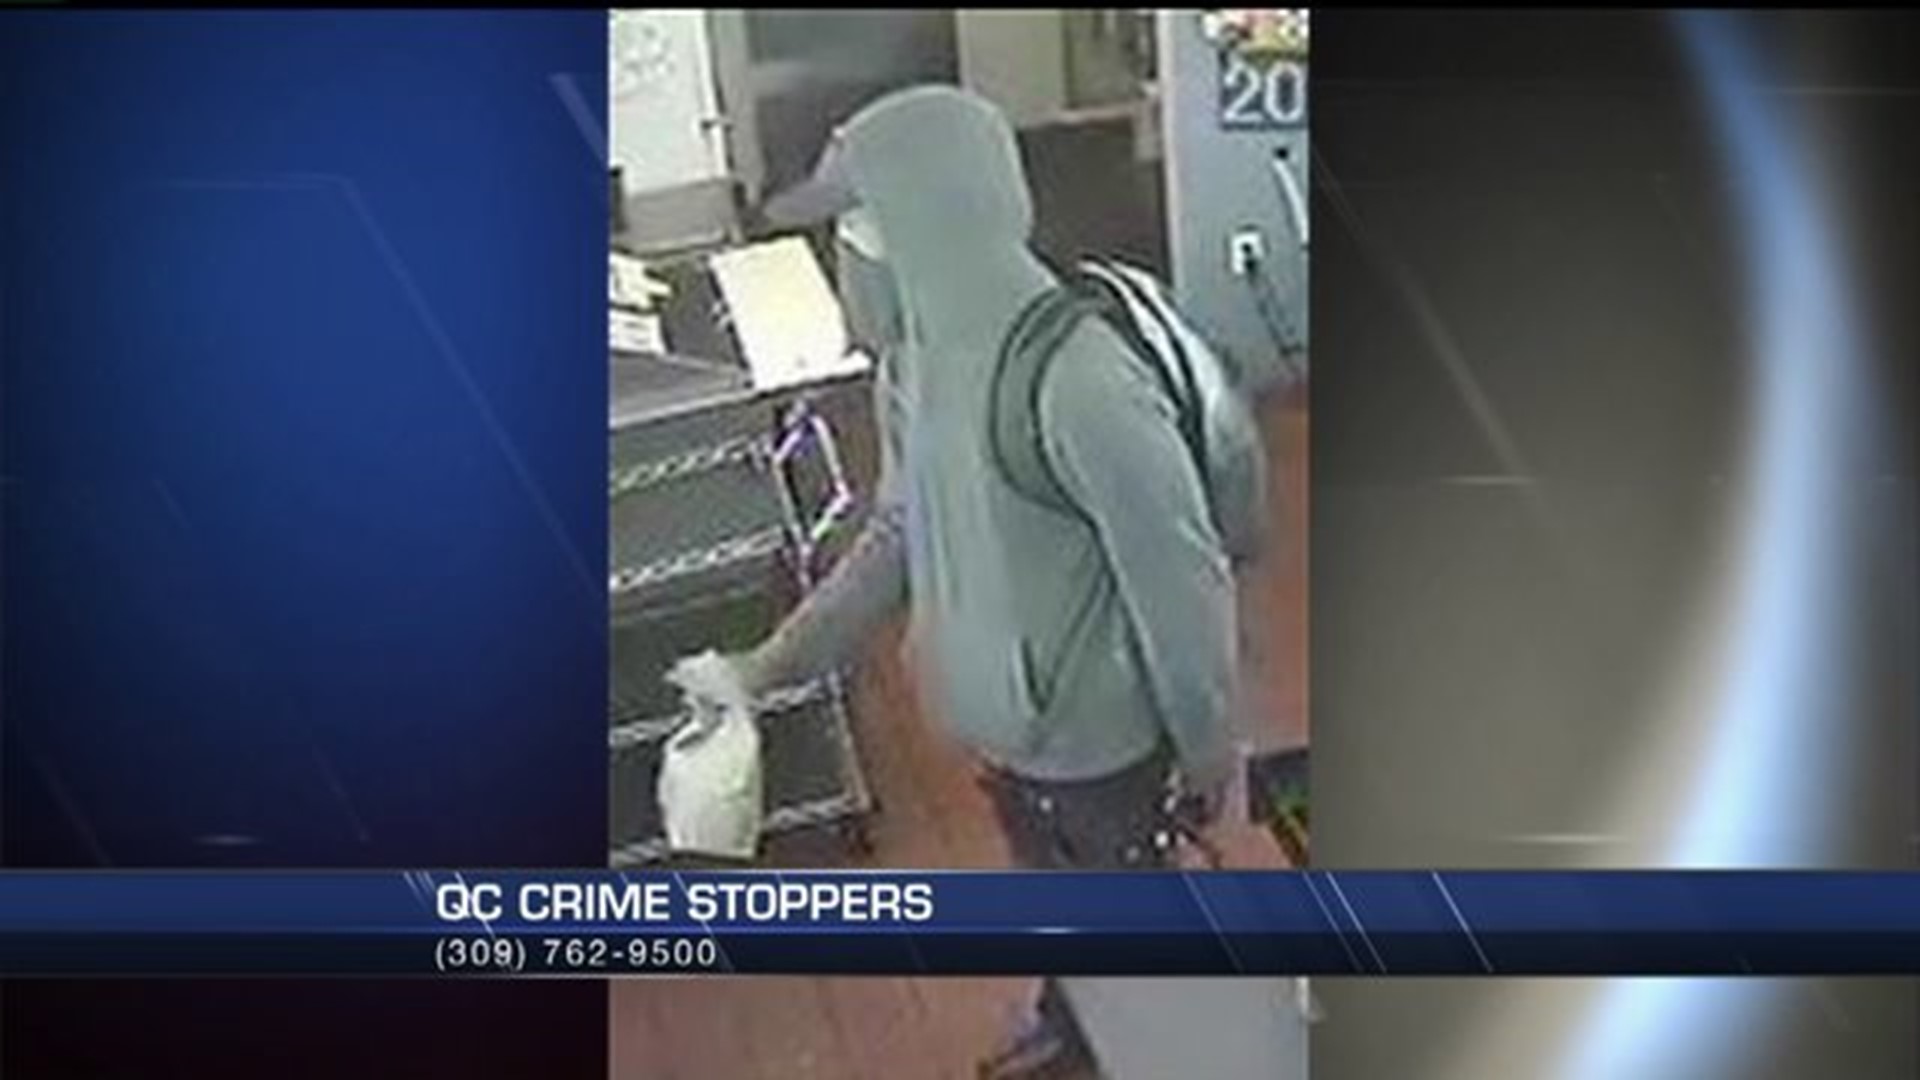 Suspect photos released in Dairy Queen armed robbery